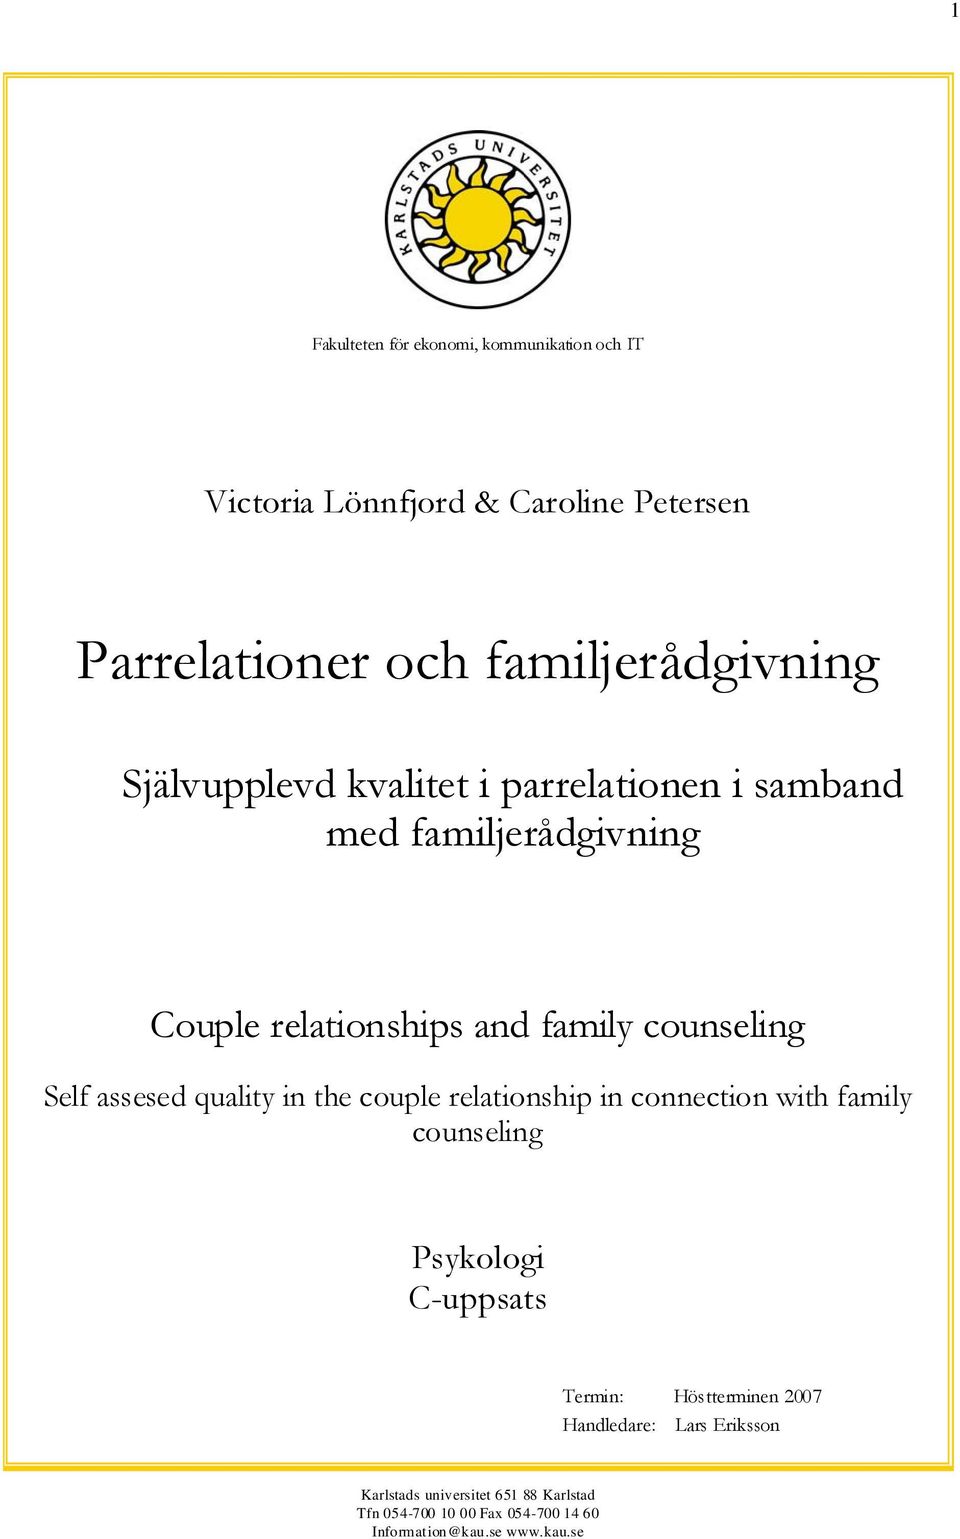 assesed quality in the couple relationship in connection with family counseling Psykologi C-uppsats Termin: Höstterminen